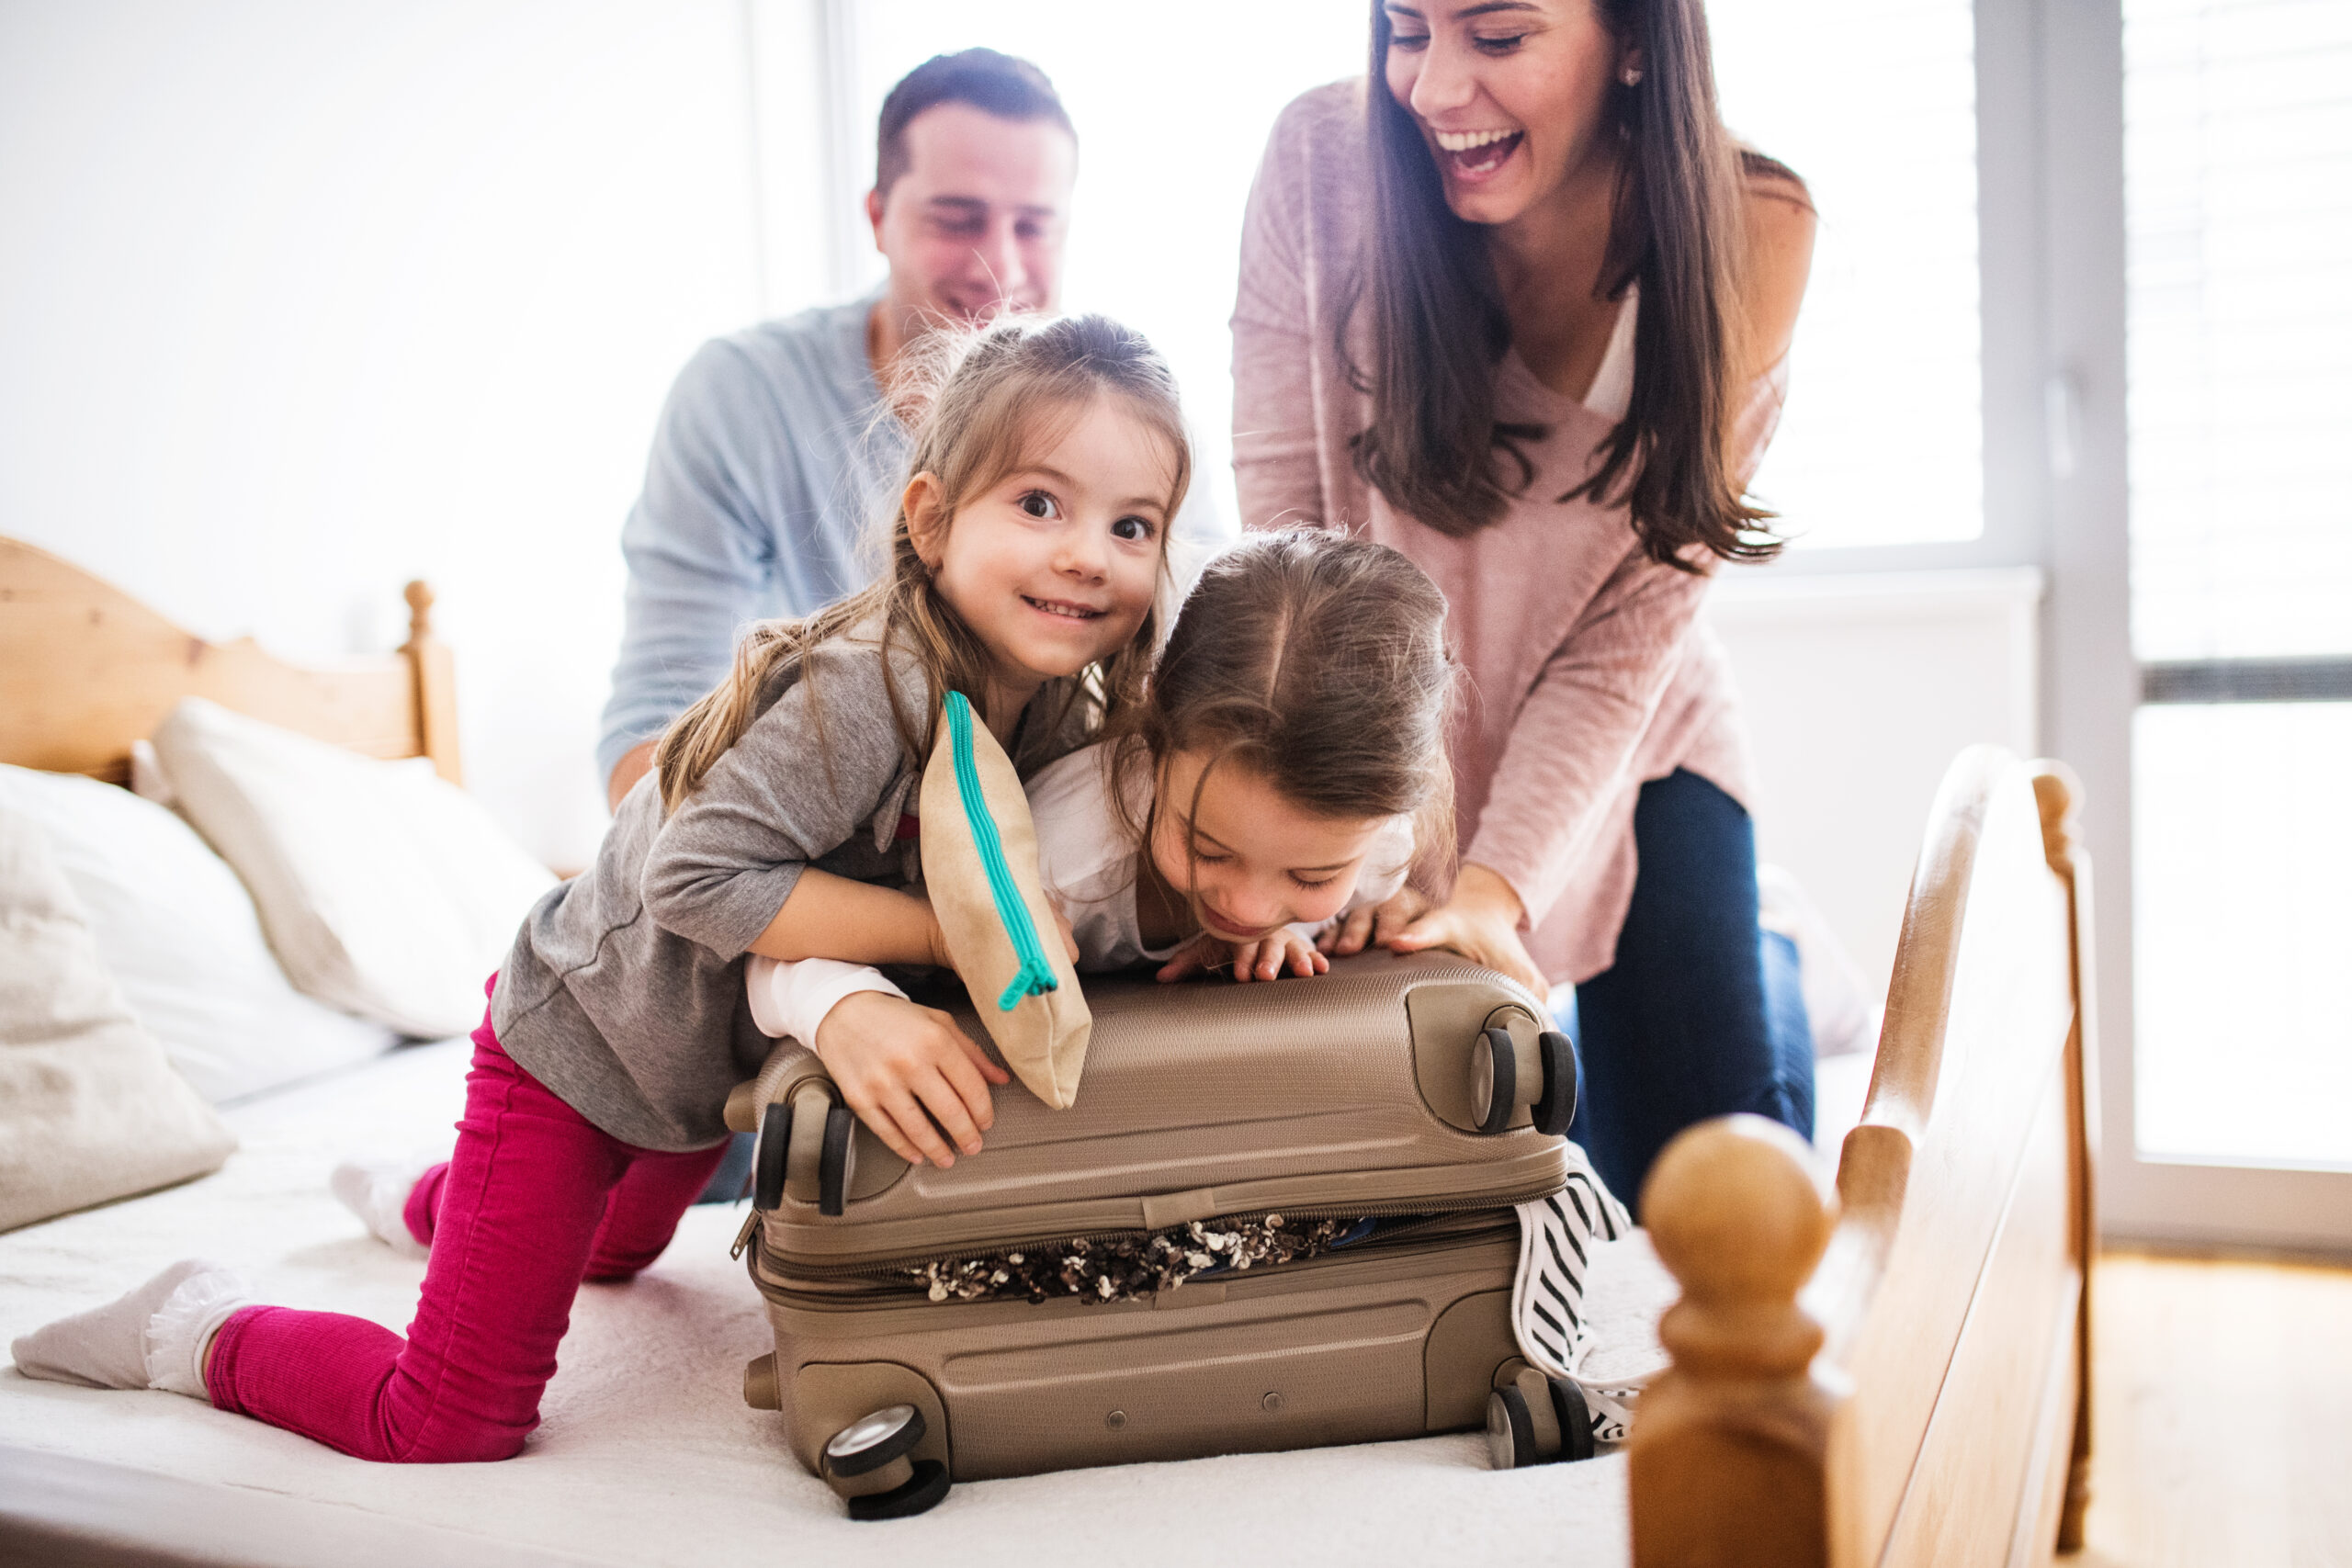 Traveling with kids this summer? Here are some tips for a relaxing and safe trip!